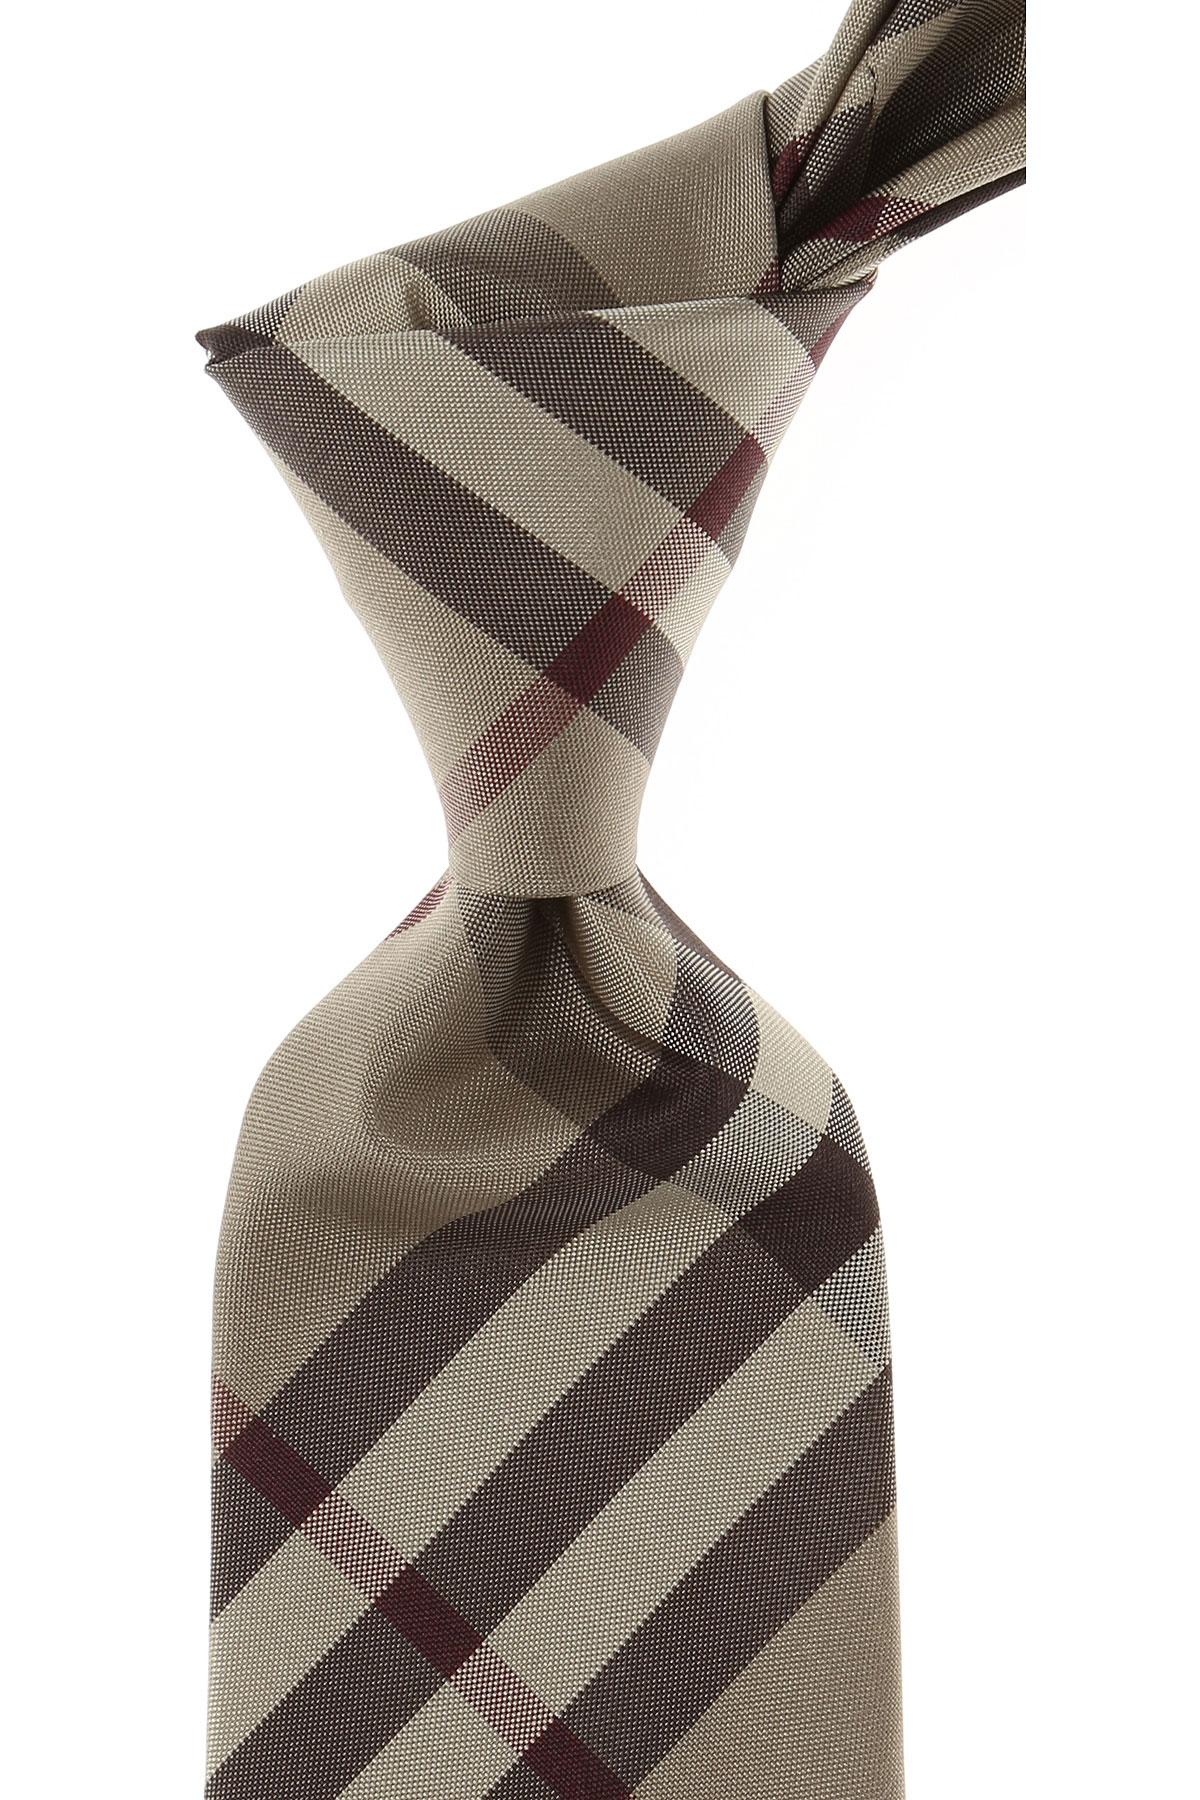 Burberry Silk Ties On Sale in Brown for 